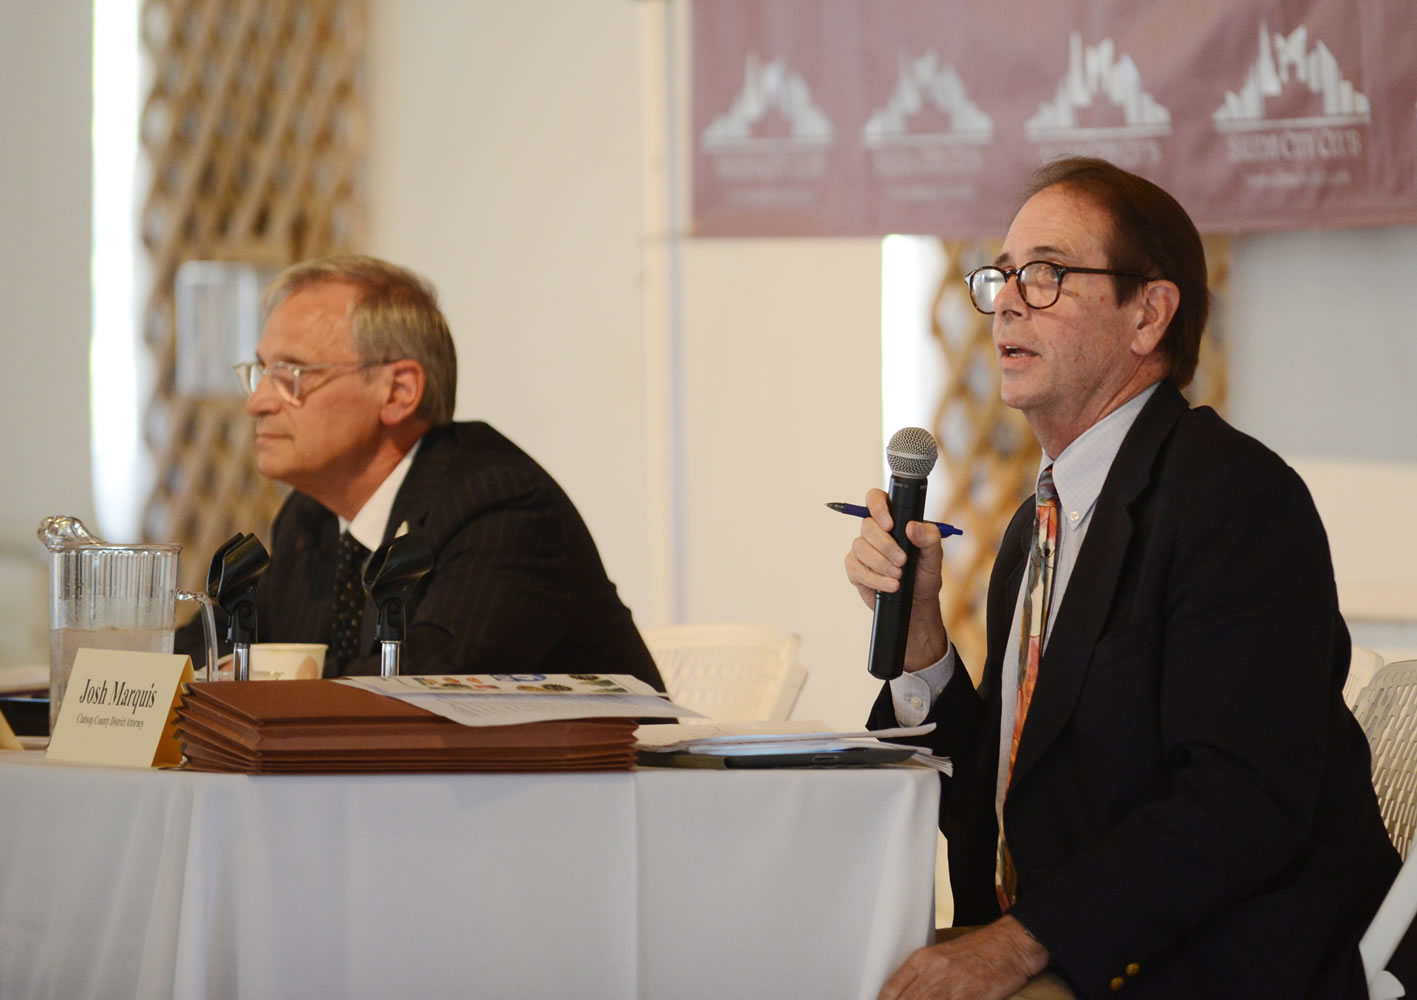 Congressman Earl Blumenauer, left, and Clatsop County District Attorney Josh Marquis debate whether Oregonians should legalize recreational marijuana during a Salem City Club debate at the Willamette Heritage Center in Salem, Ore., on Friday, Sept. 12, 2014. Blumenauer supports legalization. Marquis opposes Measure 91.